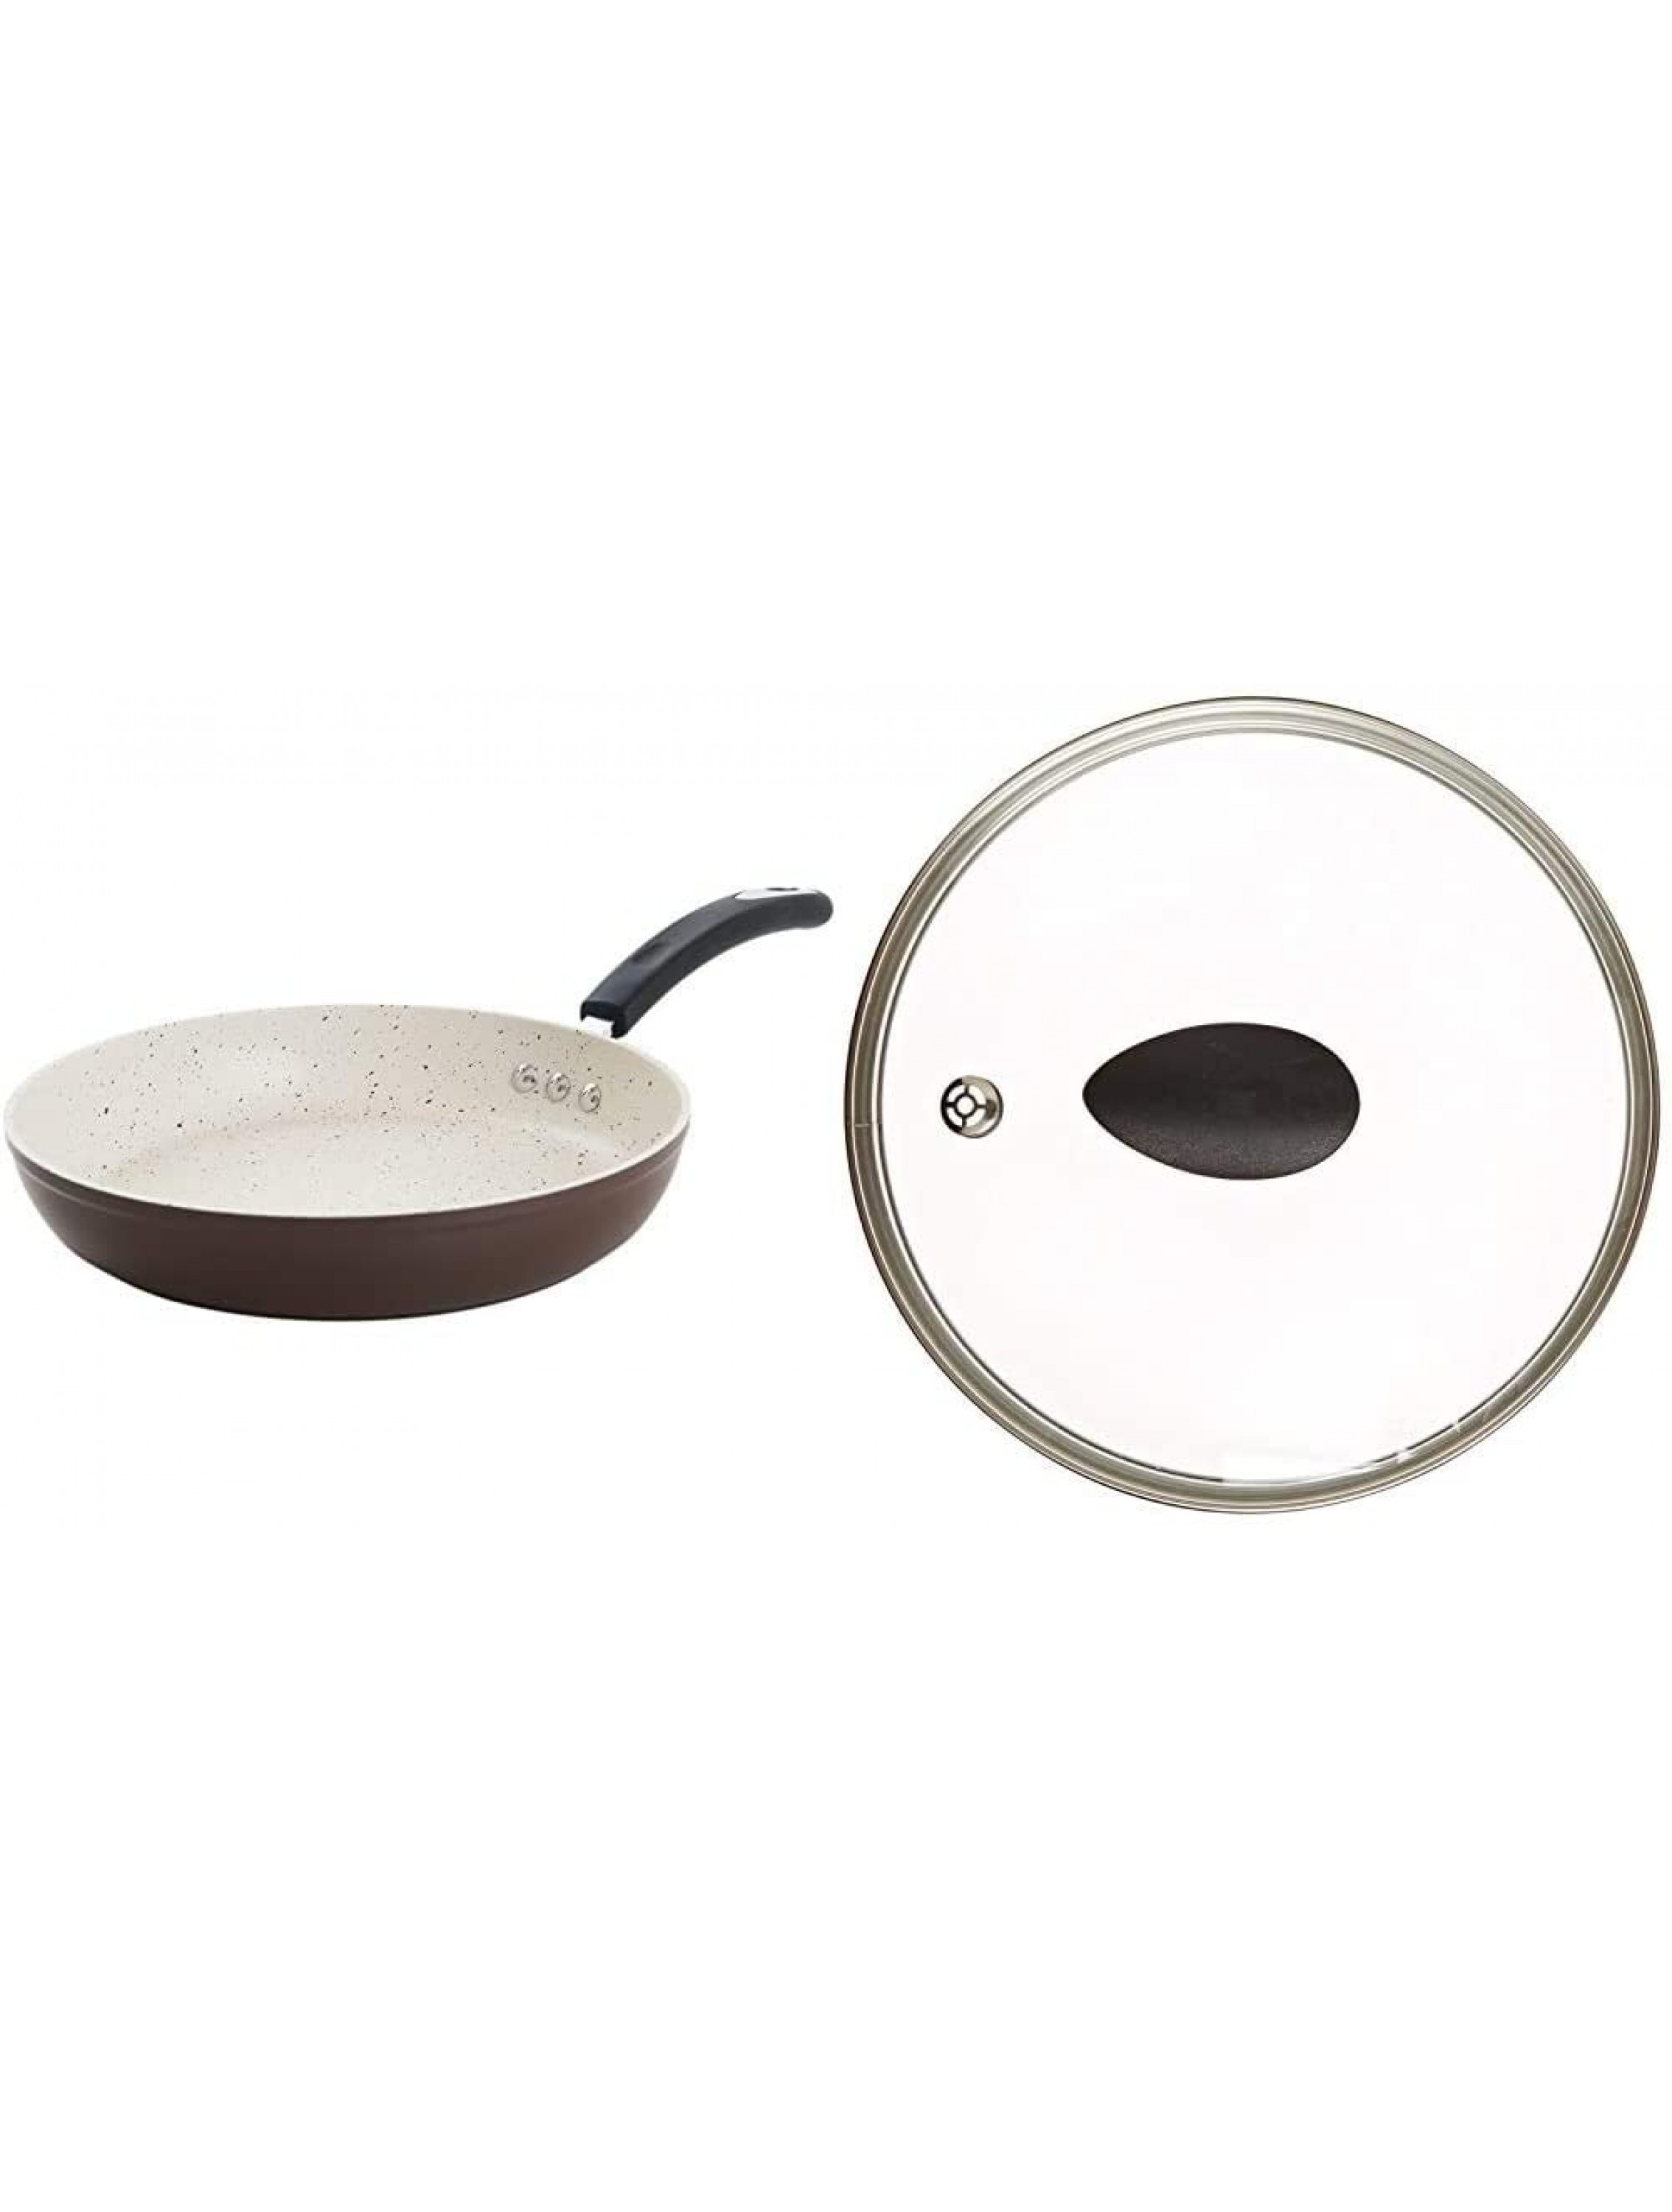 12 Stone Earth Frying Pan and Lid Set by Ozeri with 100% APEO & PFOA-Free Stone-Derived Non-Stick Coating from Germany - BVYE7VOYH